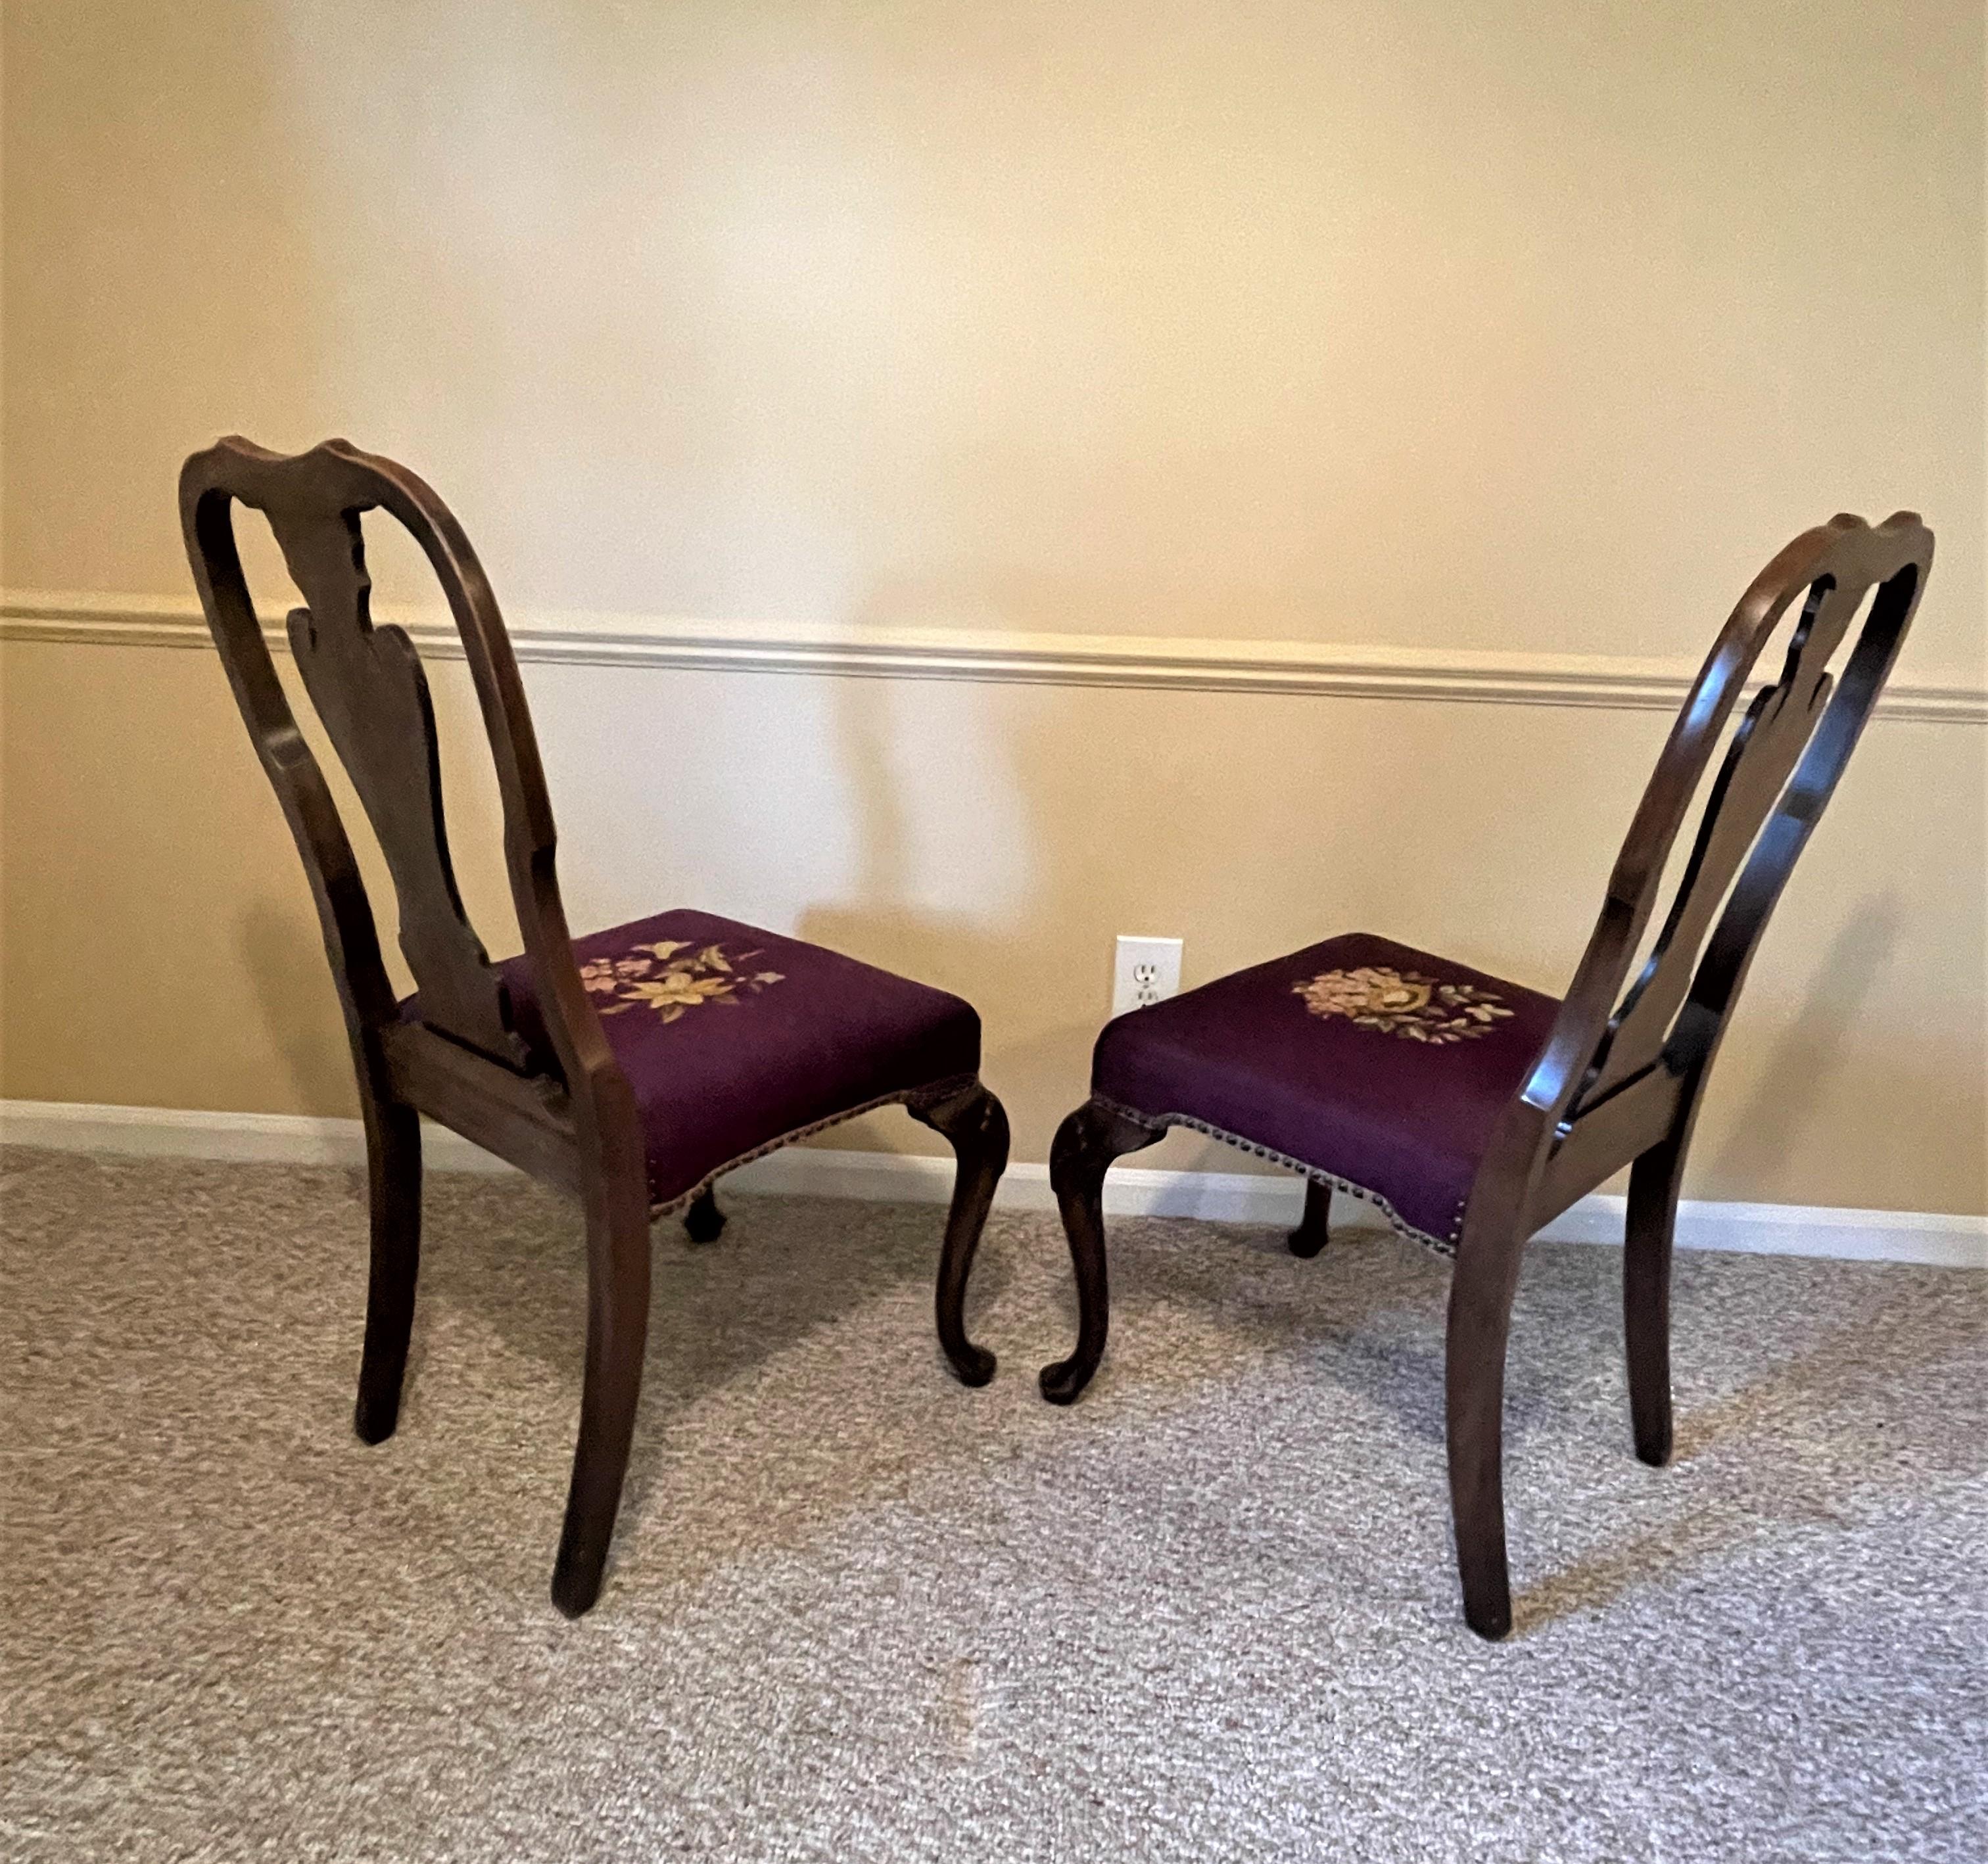 1930s Queen Ann Solid Walnut Dining Chairs with Aubergine Wool Needlepoint Seats For Sale 2